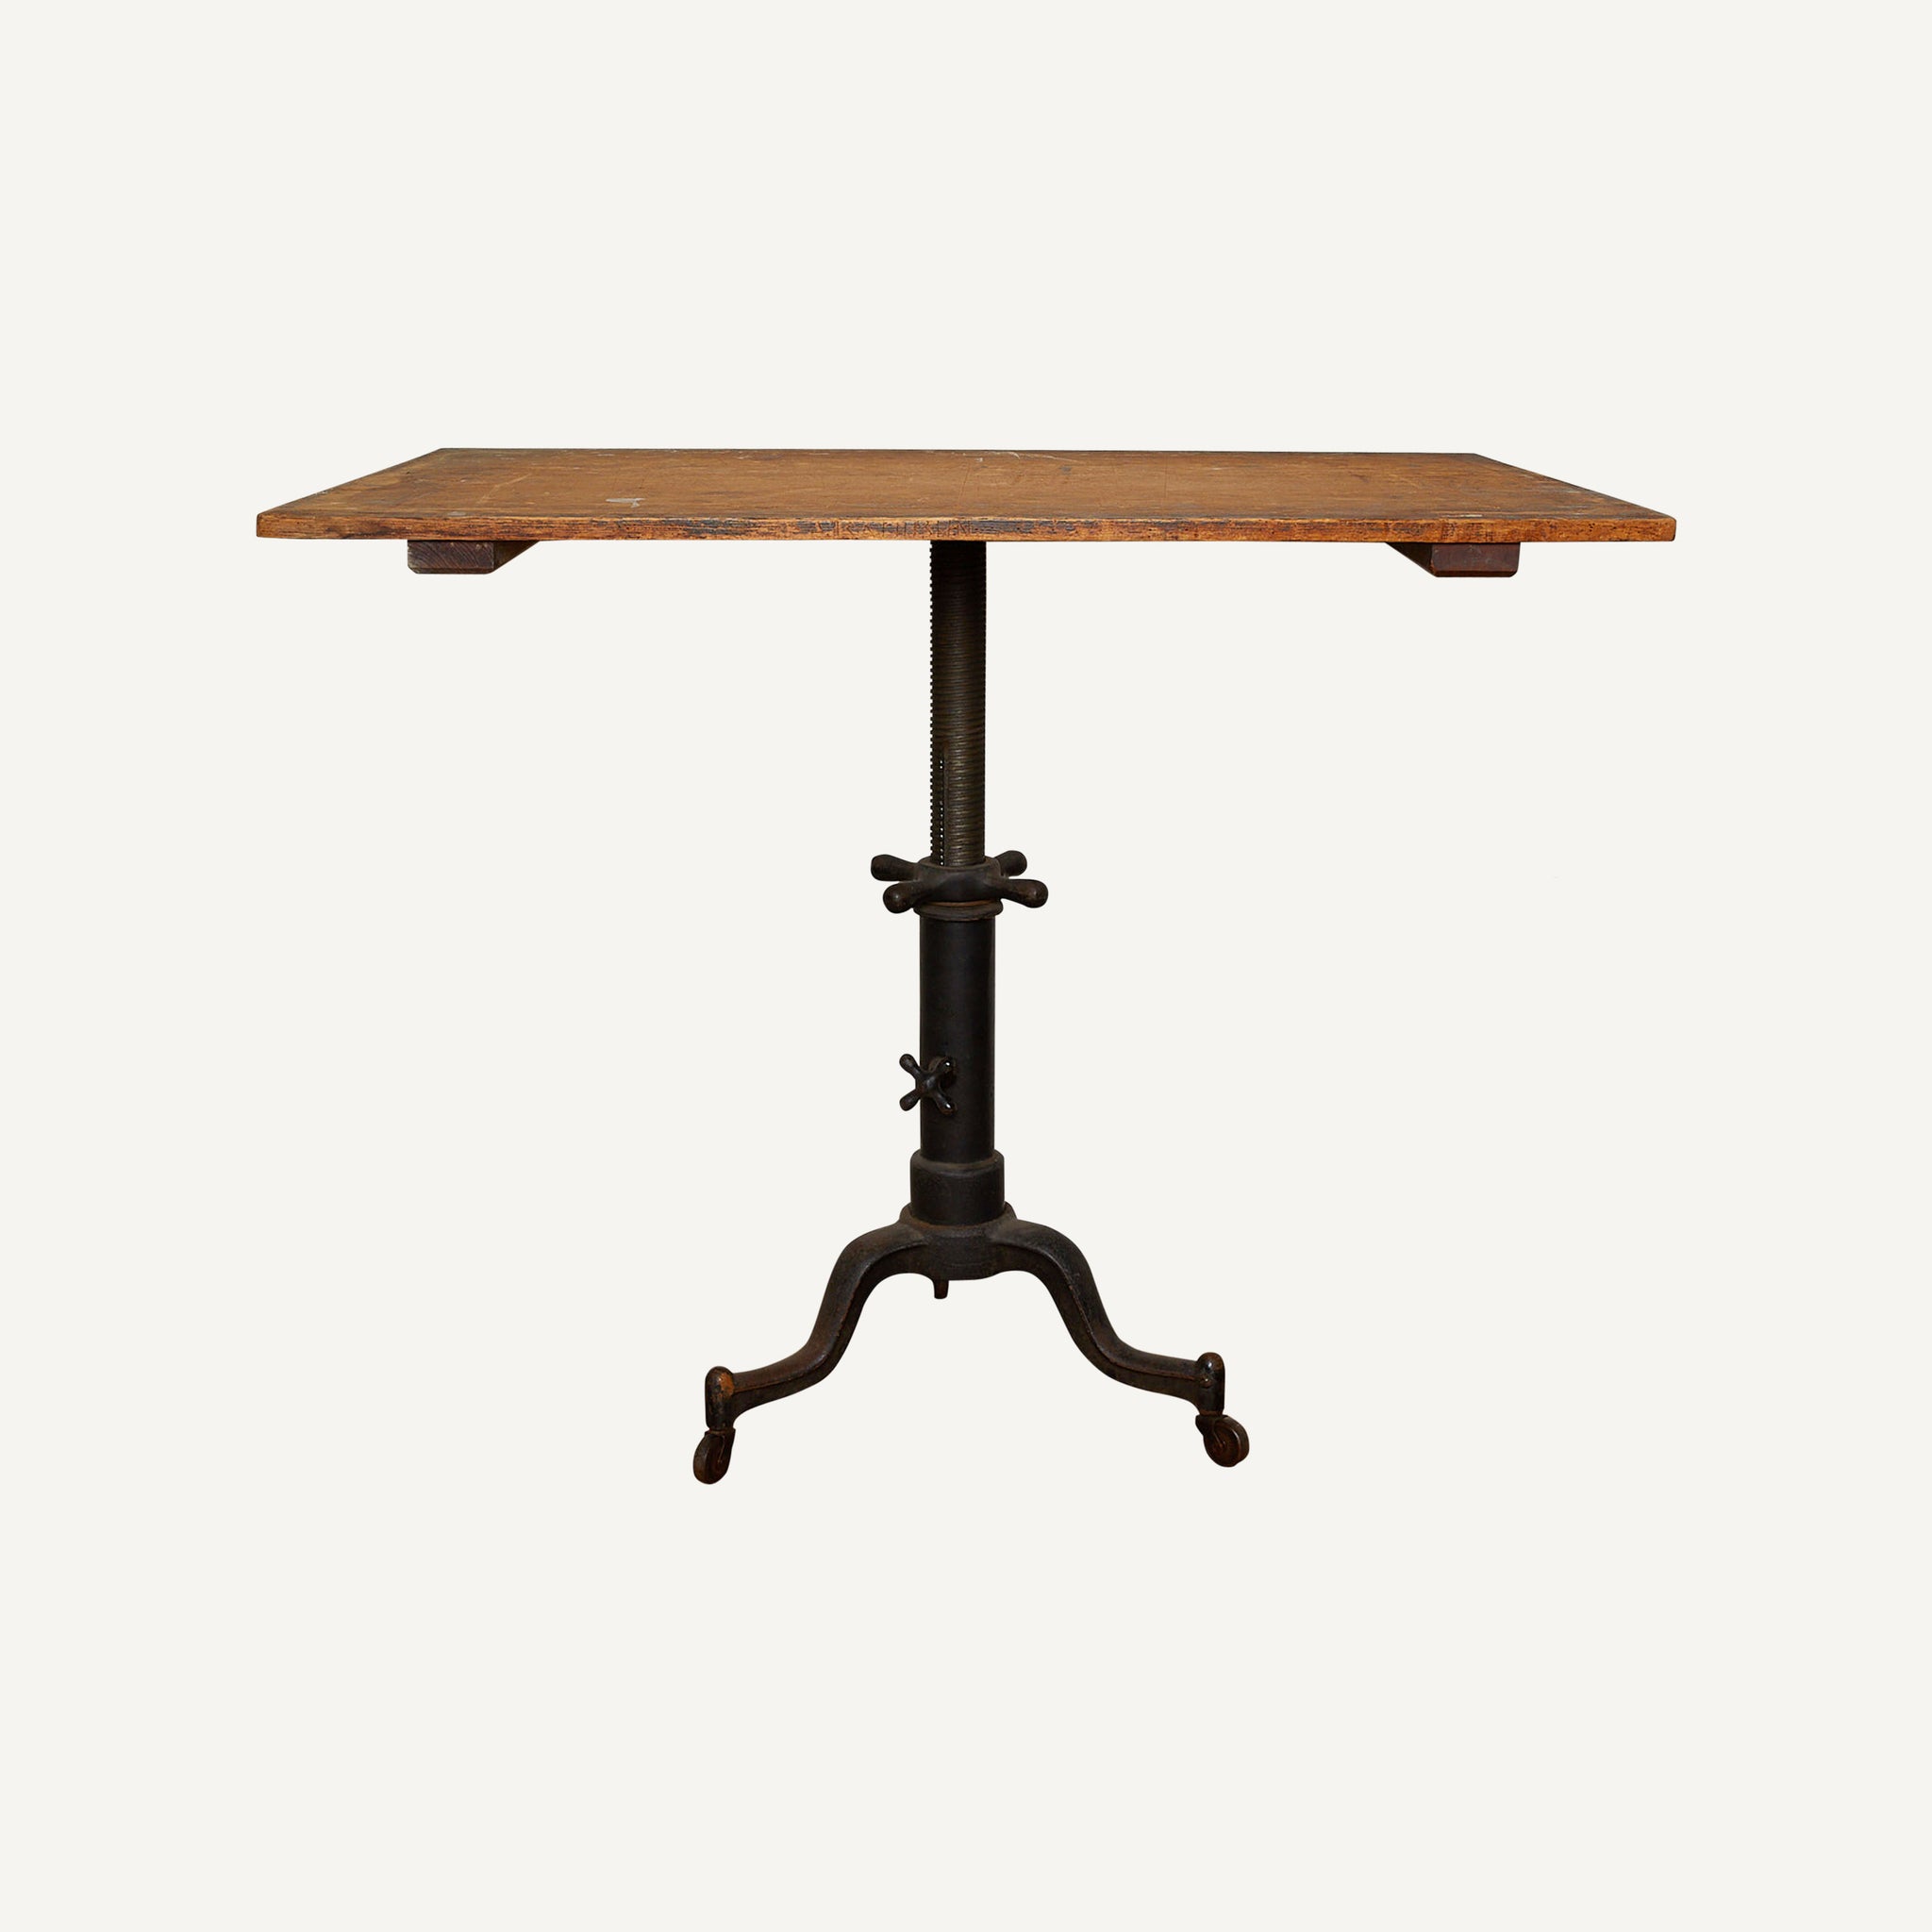 ANTIQUE DRAFTING TABLE